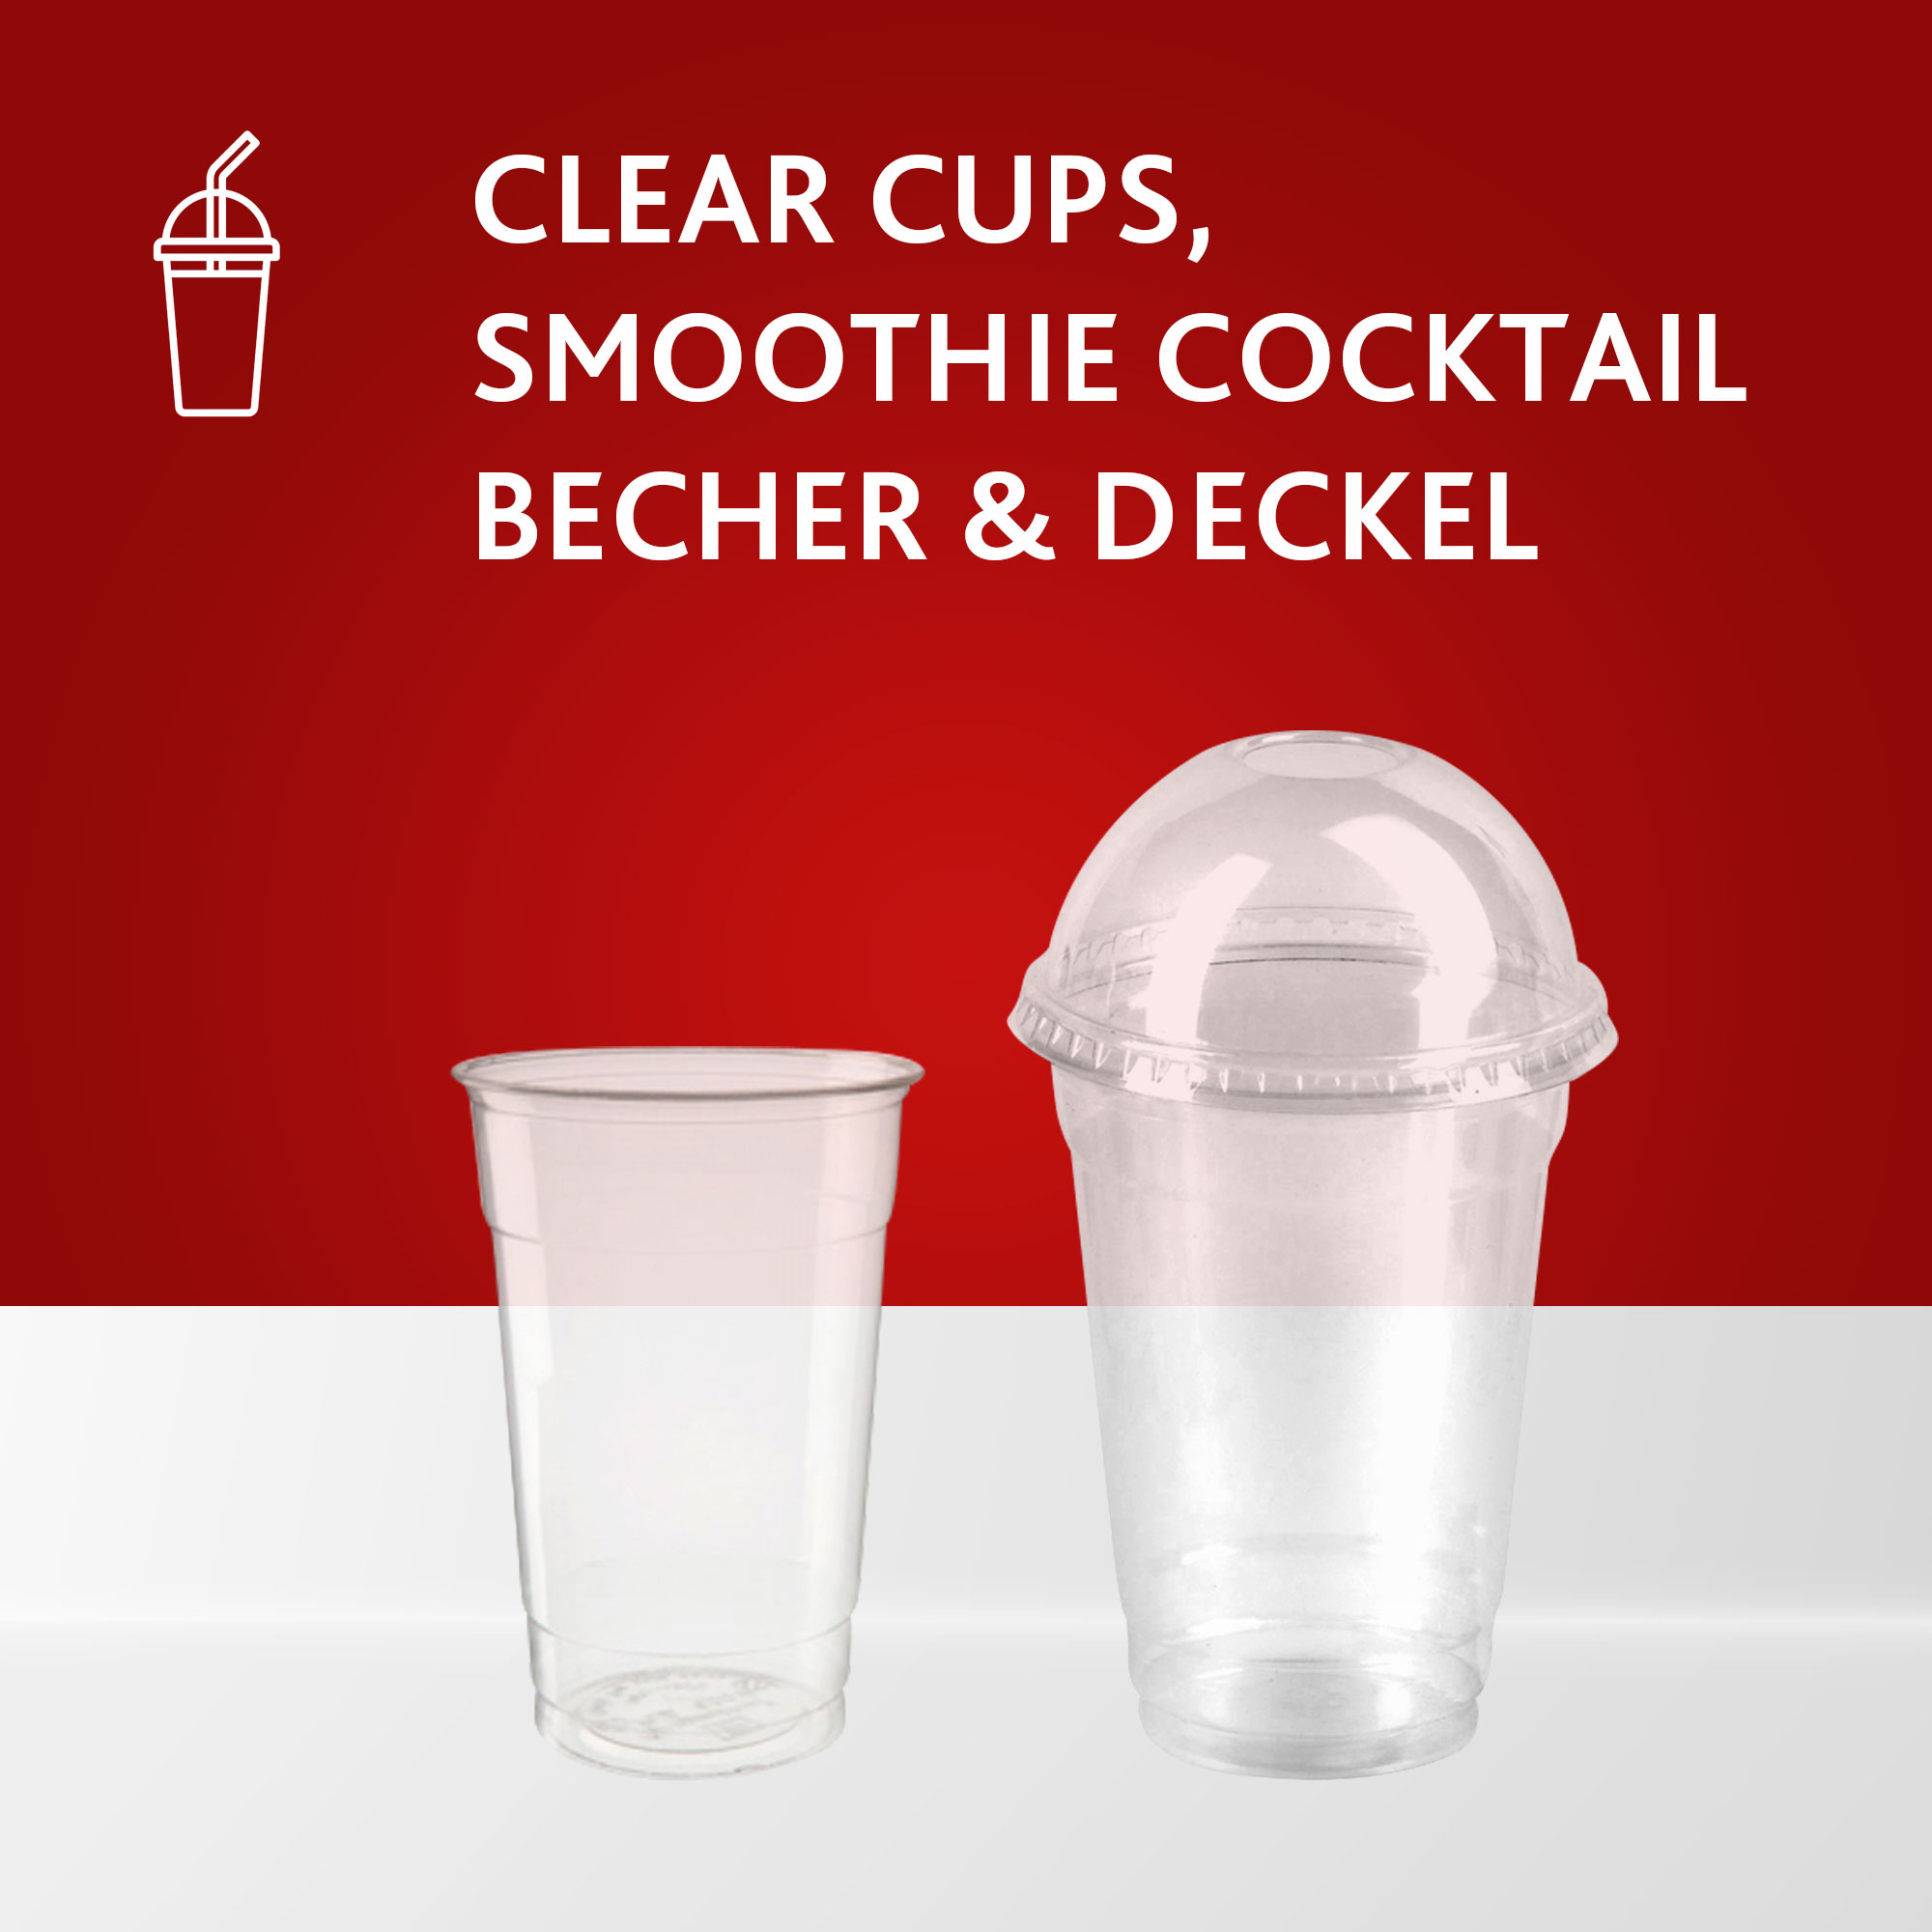 Clear Cups, Smoothie, Cocktail Becher & Deckel